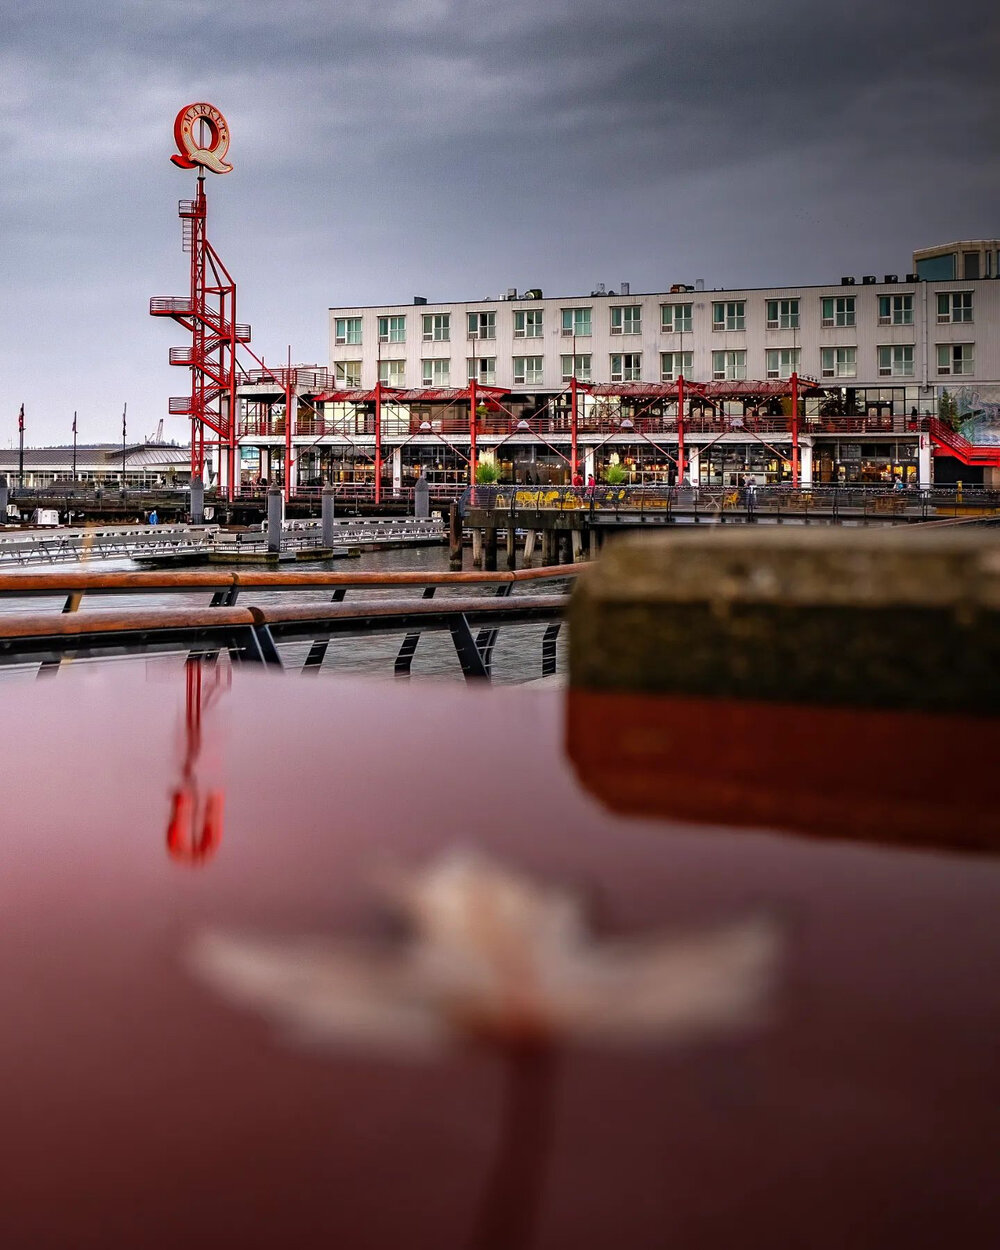 Our RUNNER-UP for this month's photo contest is @rl.images. Such a cool reflection of this Lower Lonsdale icon!

#LowerLonsdale #NorthVan #Vancouver #localartist #photography #beautiful #love